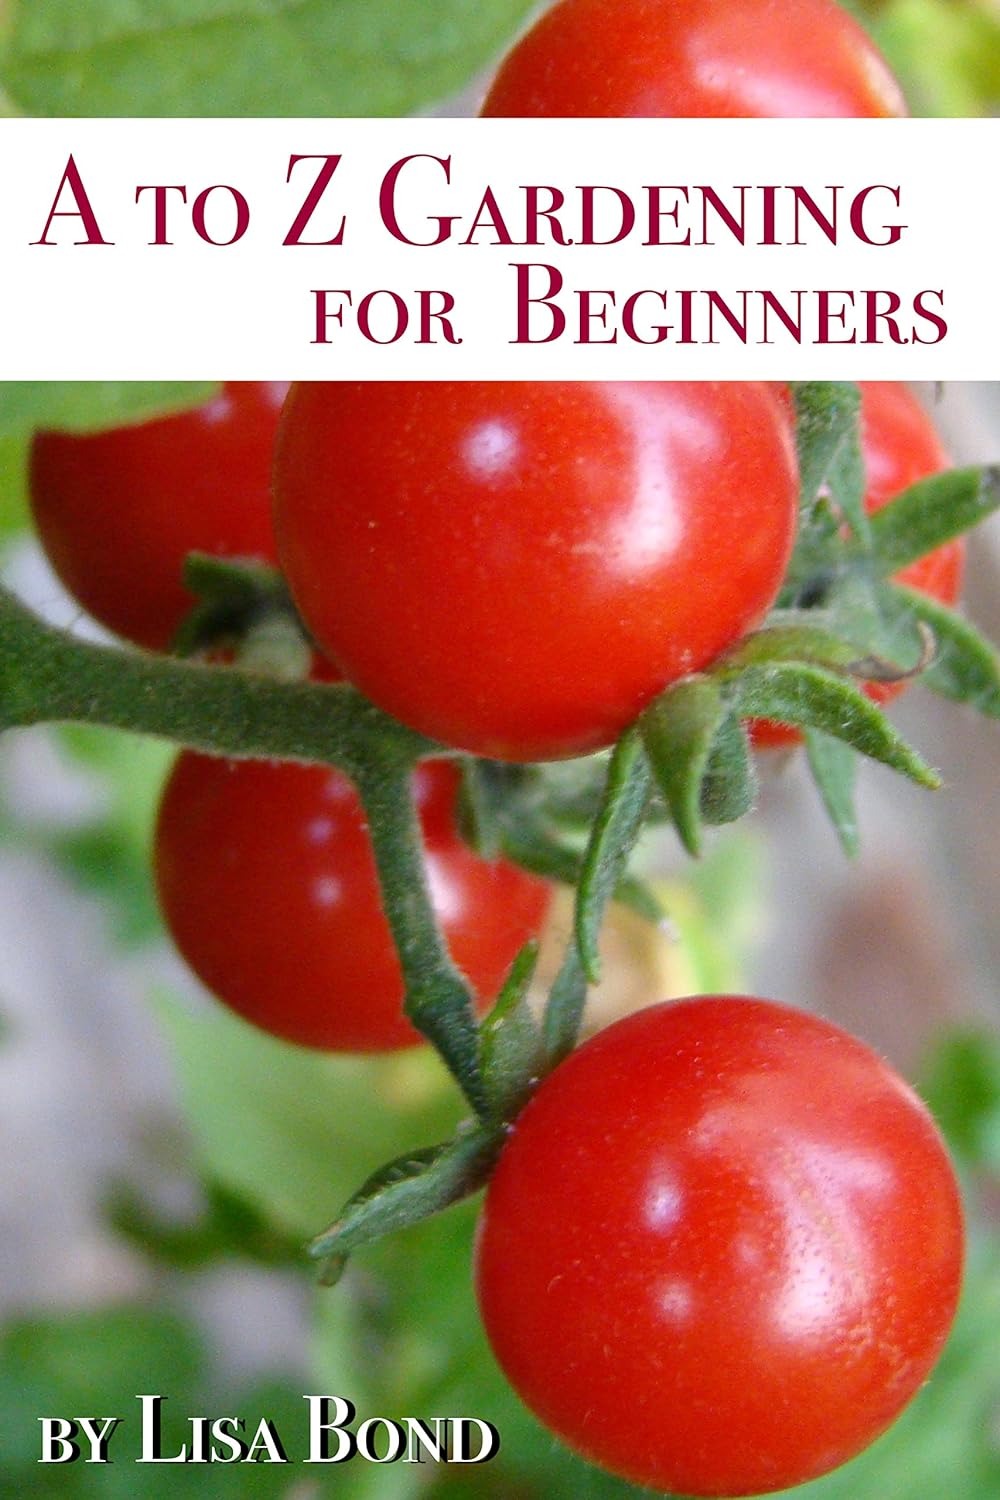 Free Kindle eBooks Collection (A-Z Gardening, Tomatoes and Herb...)